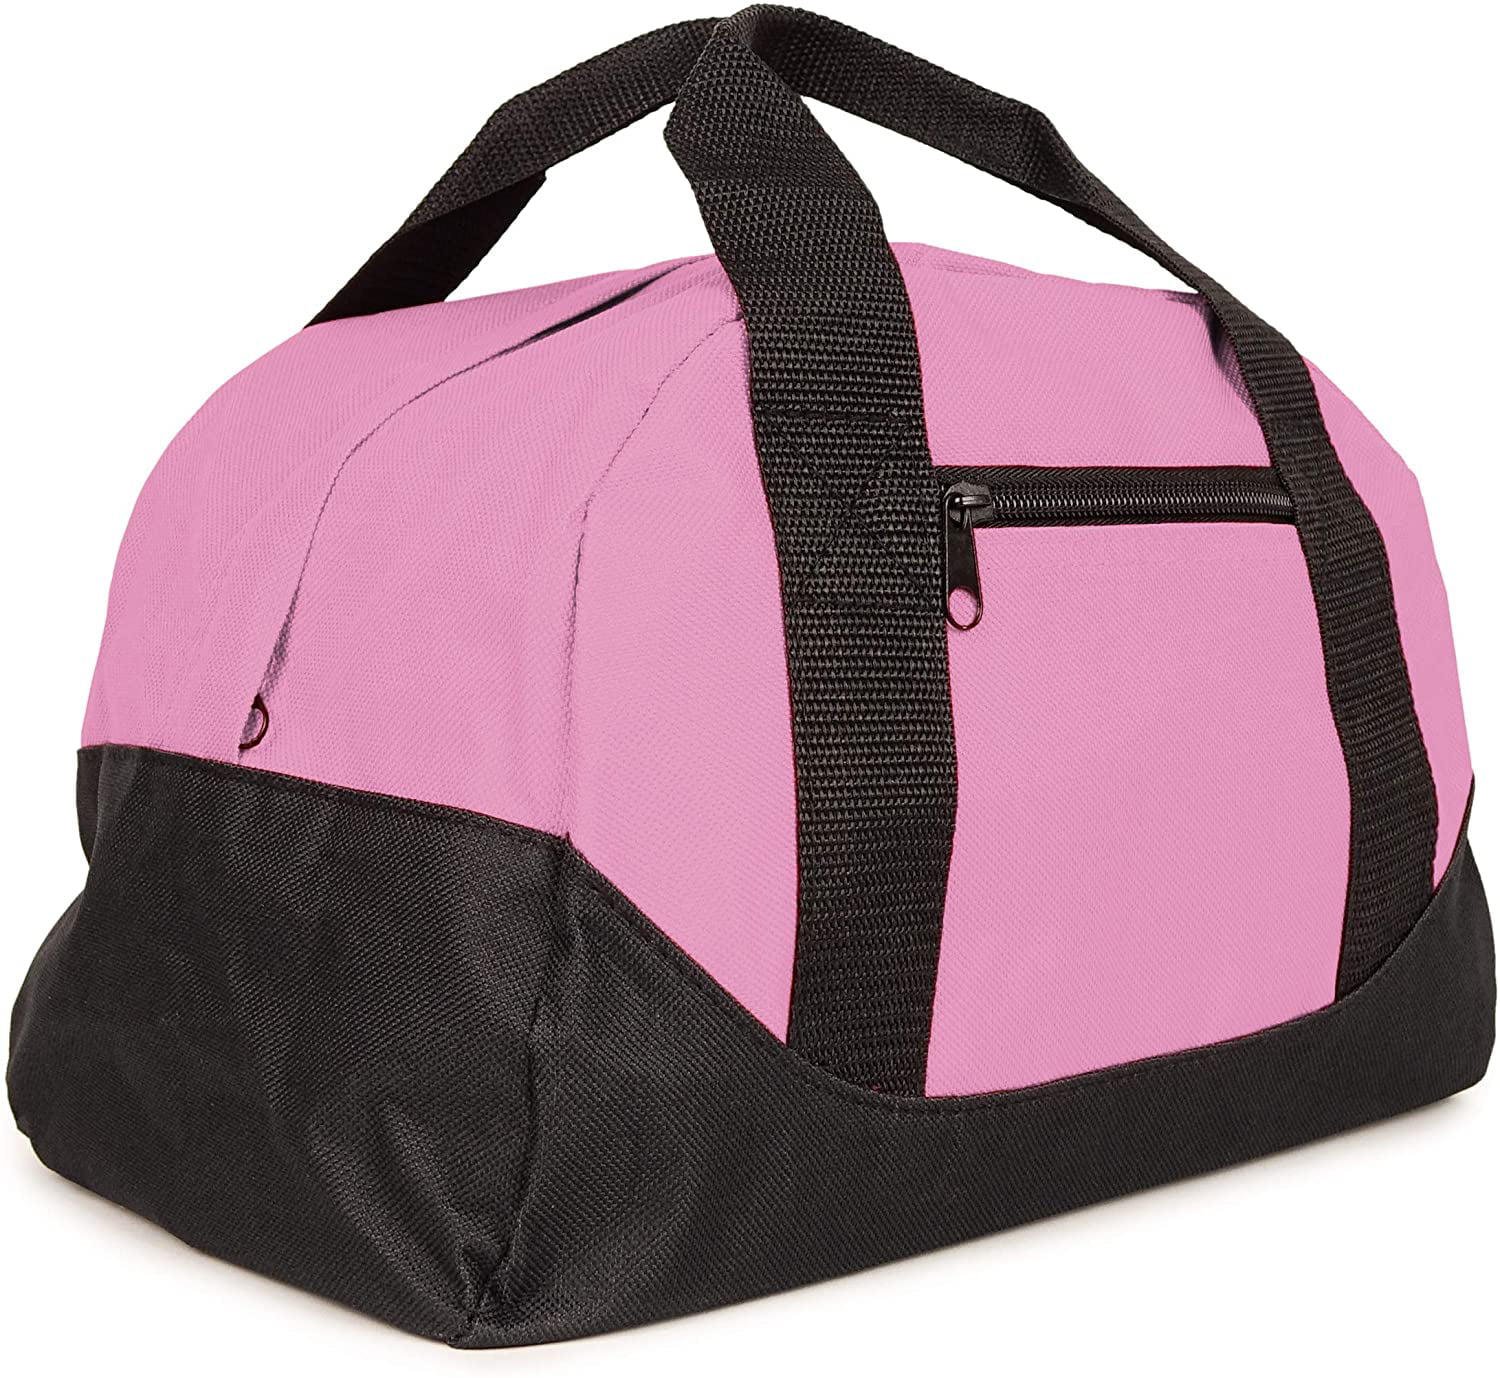 Simple Walmart Workout Bags for Women